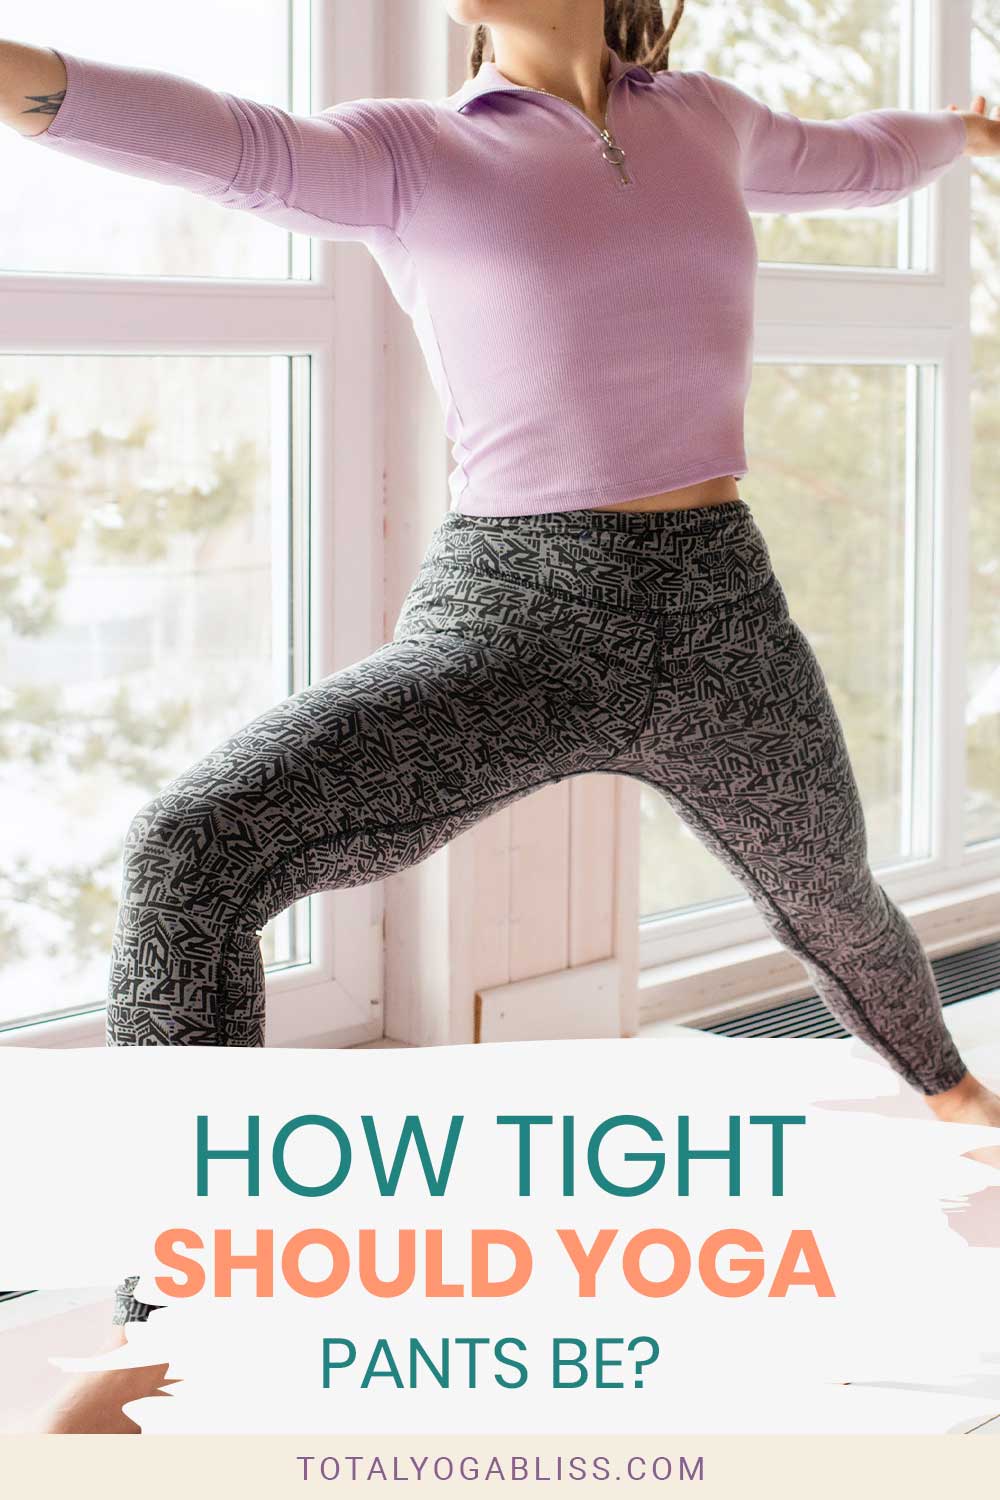 How Tight Should Yoga Pants Be?